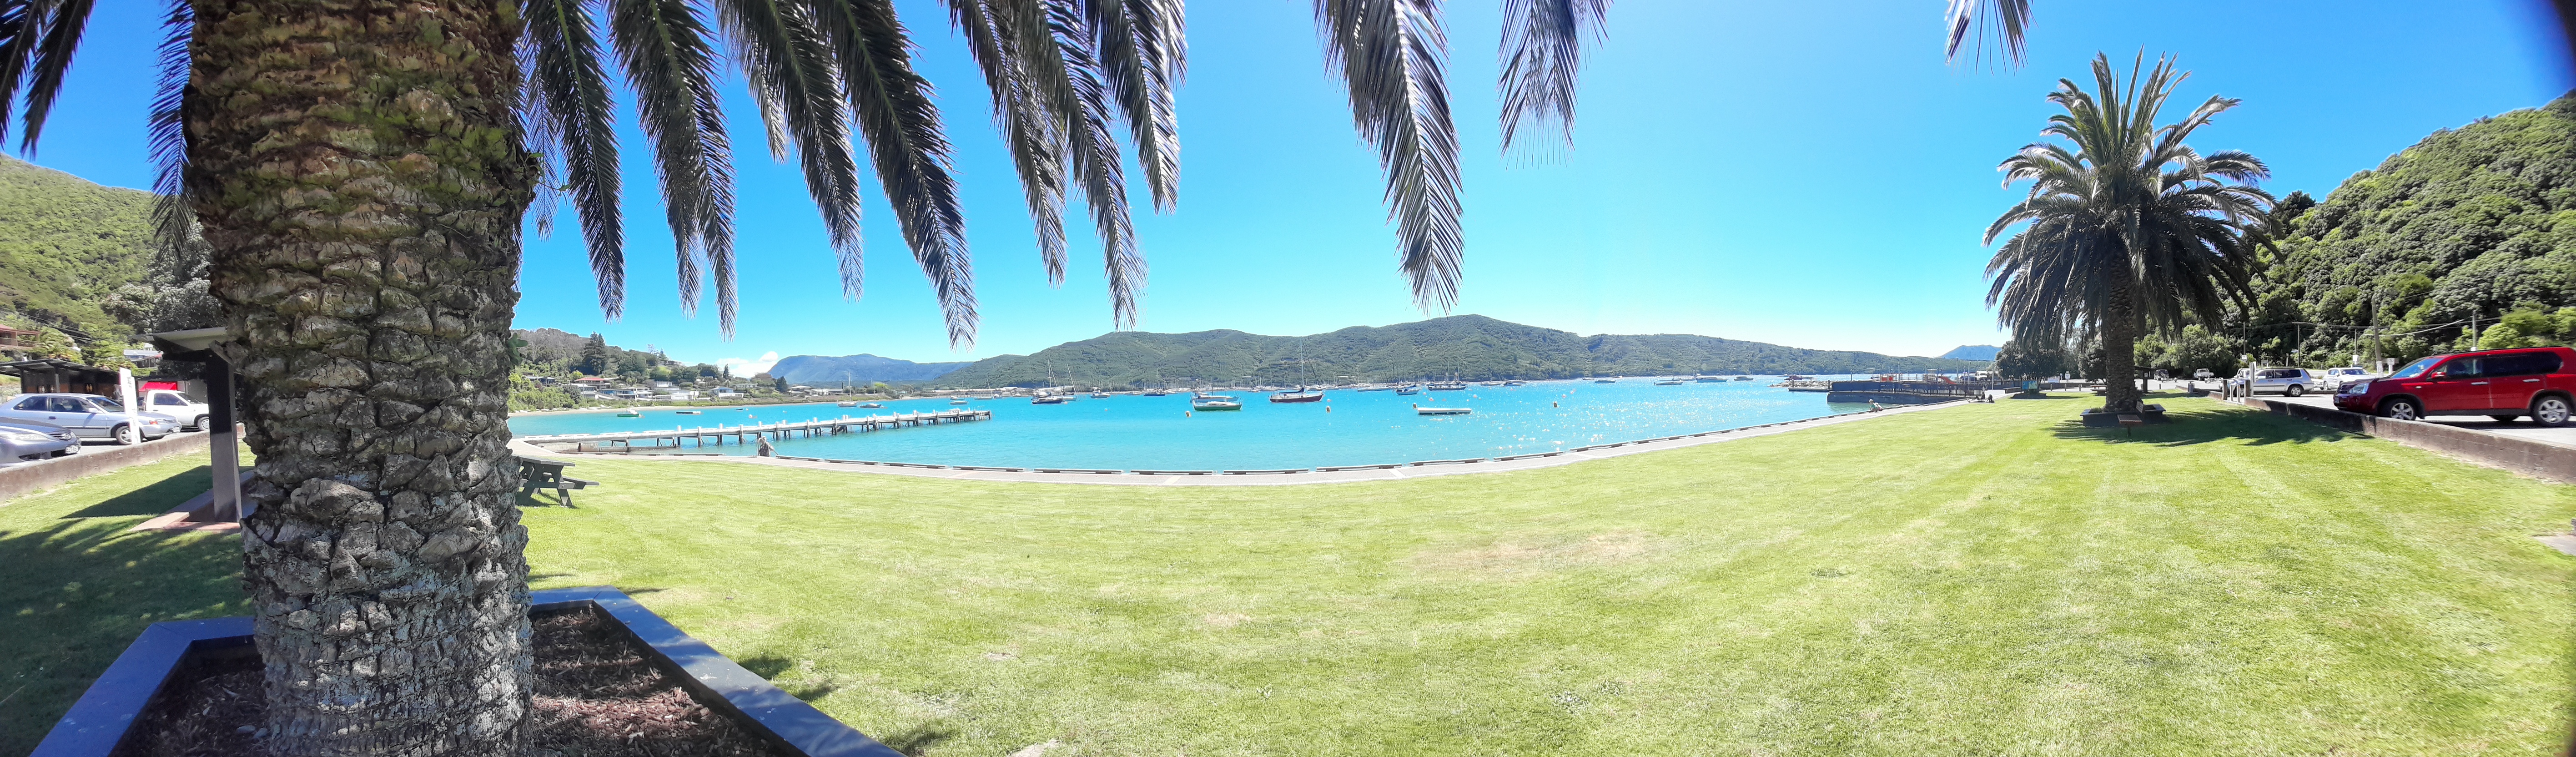 Photos of Waikawa Bay, Picton. Palm Tree on the left looking out to the Sounds.